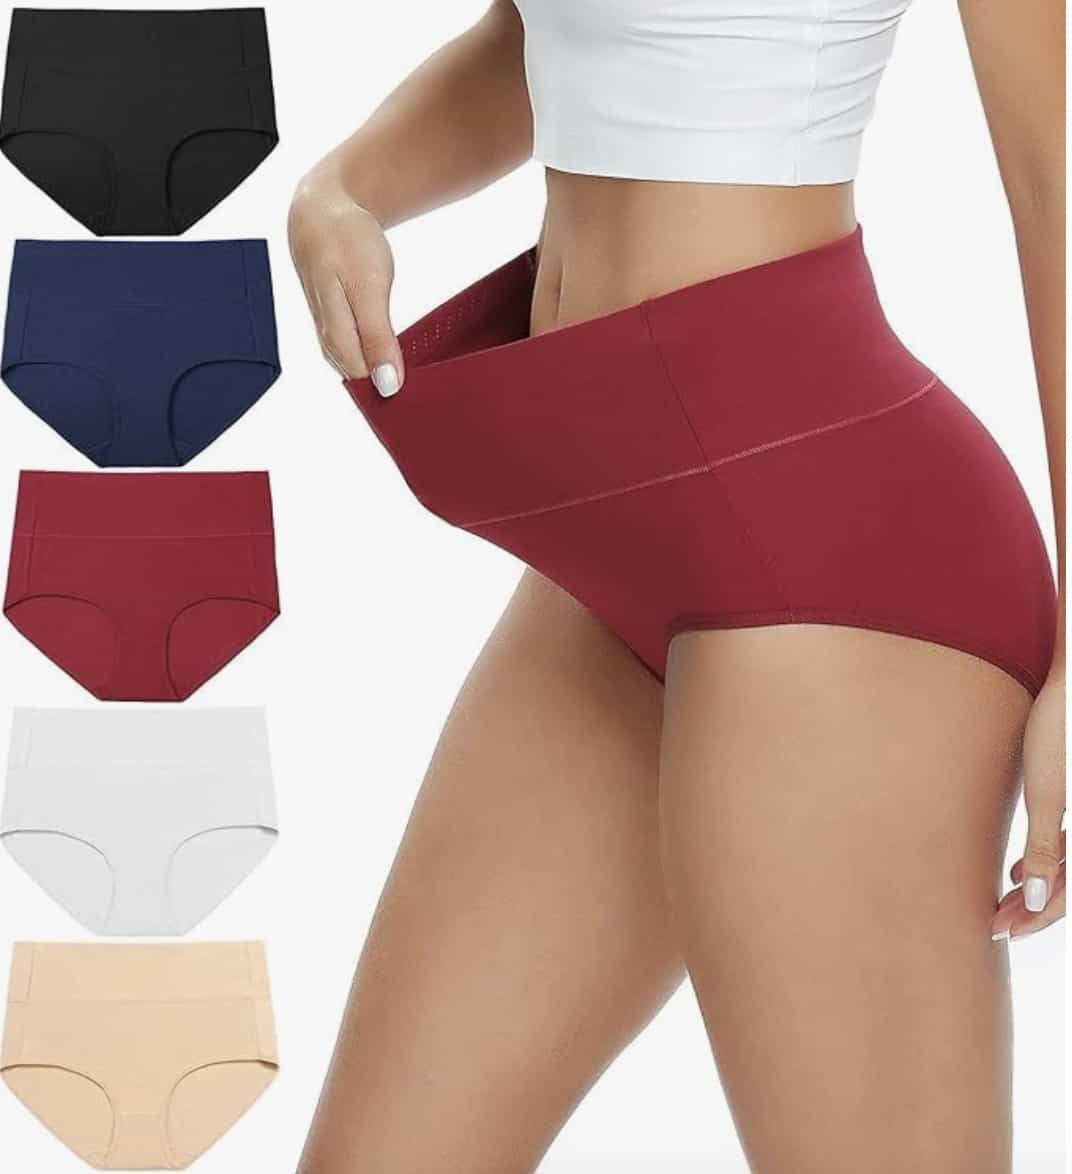 3 Benefits of Shapewear for Lower Belly Pooch - Paisley & Sparrow